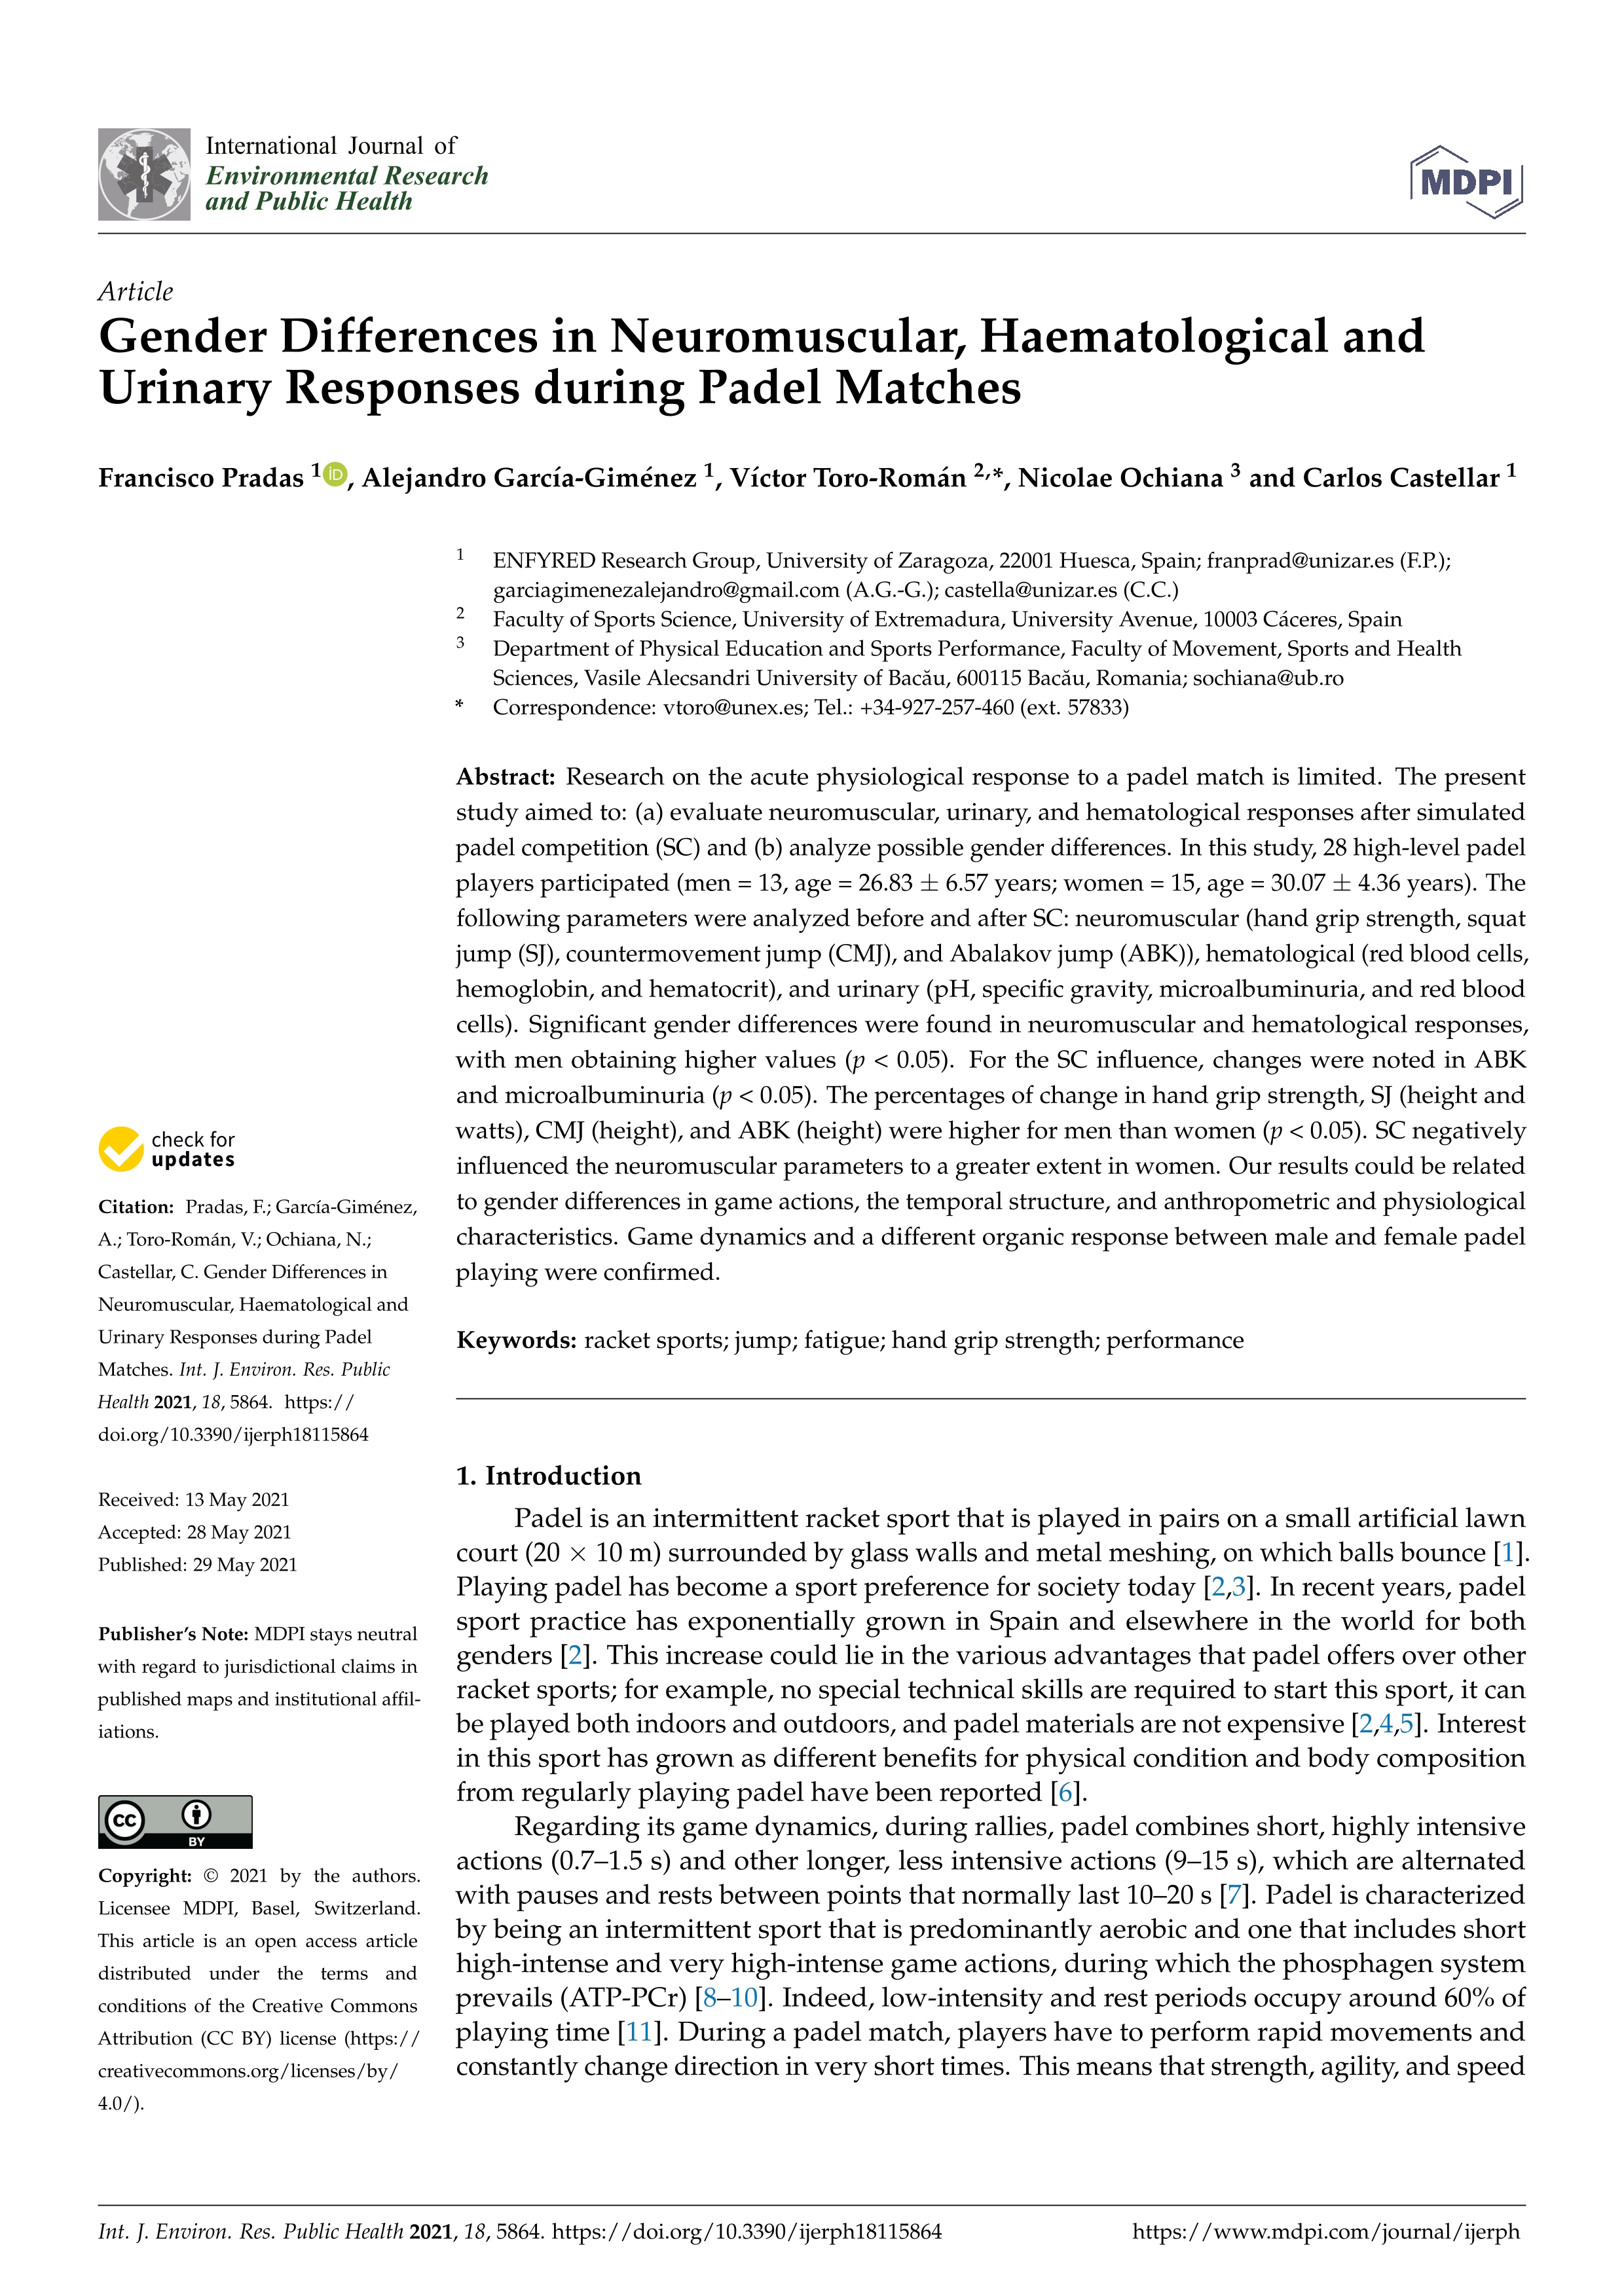 Gender differences in neuromuscular, haematological and urinary responses during padel matches